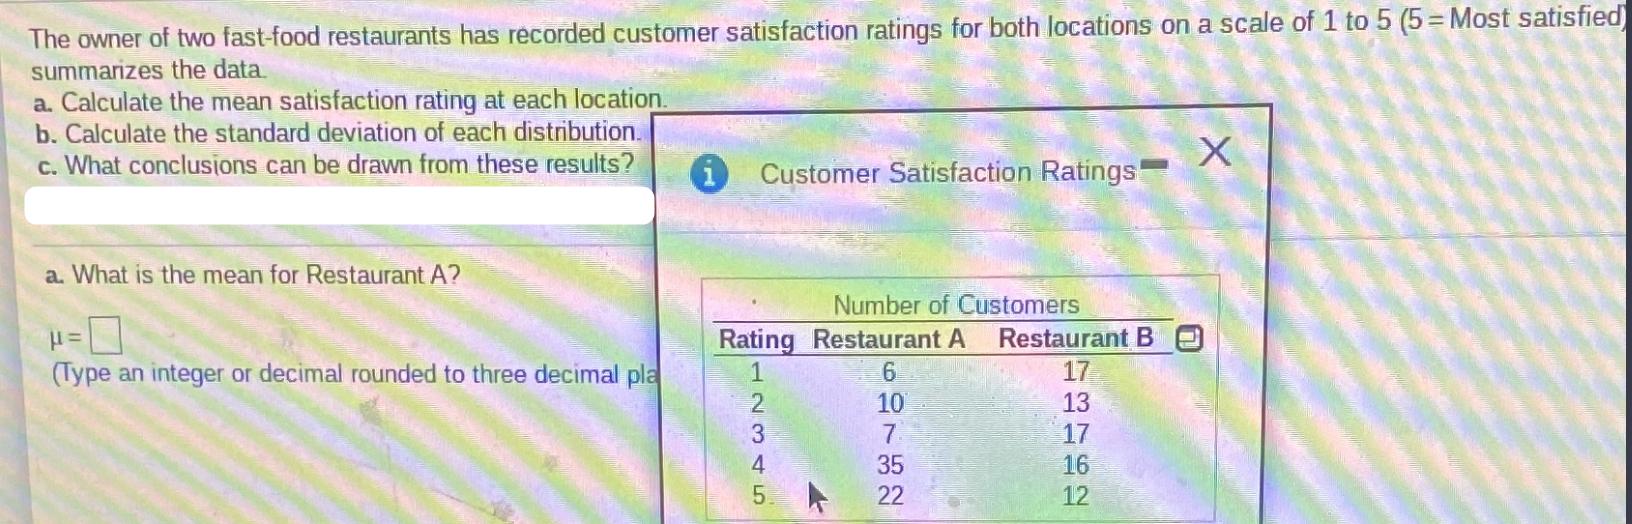 The owner of two fast-food restaurants has recorded customer satisfaction ratings for both locations on a